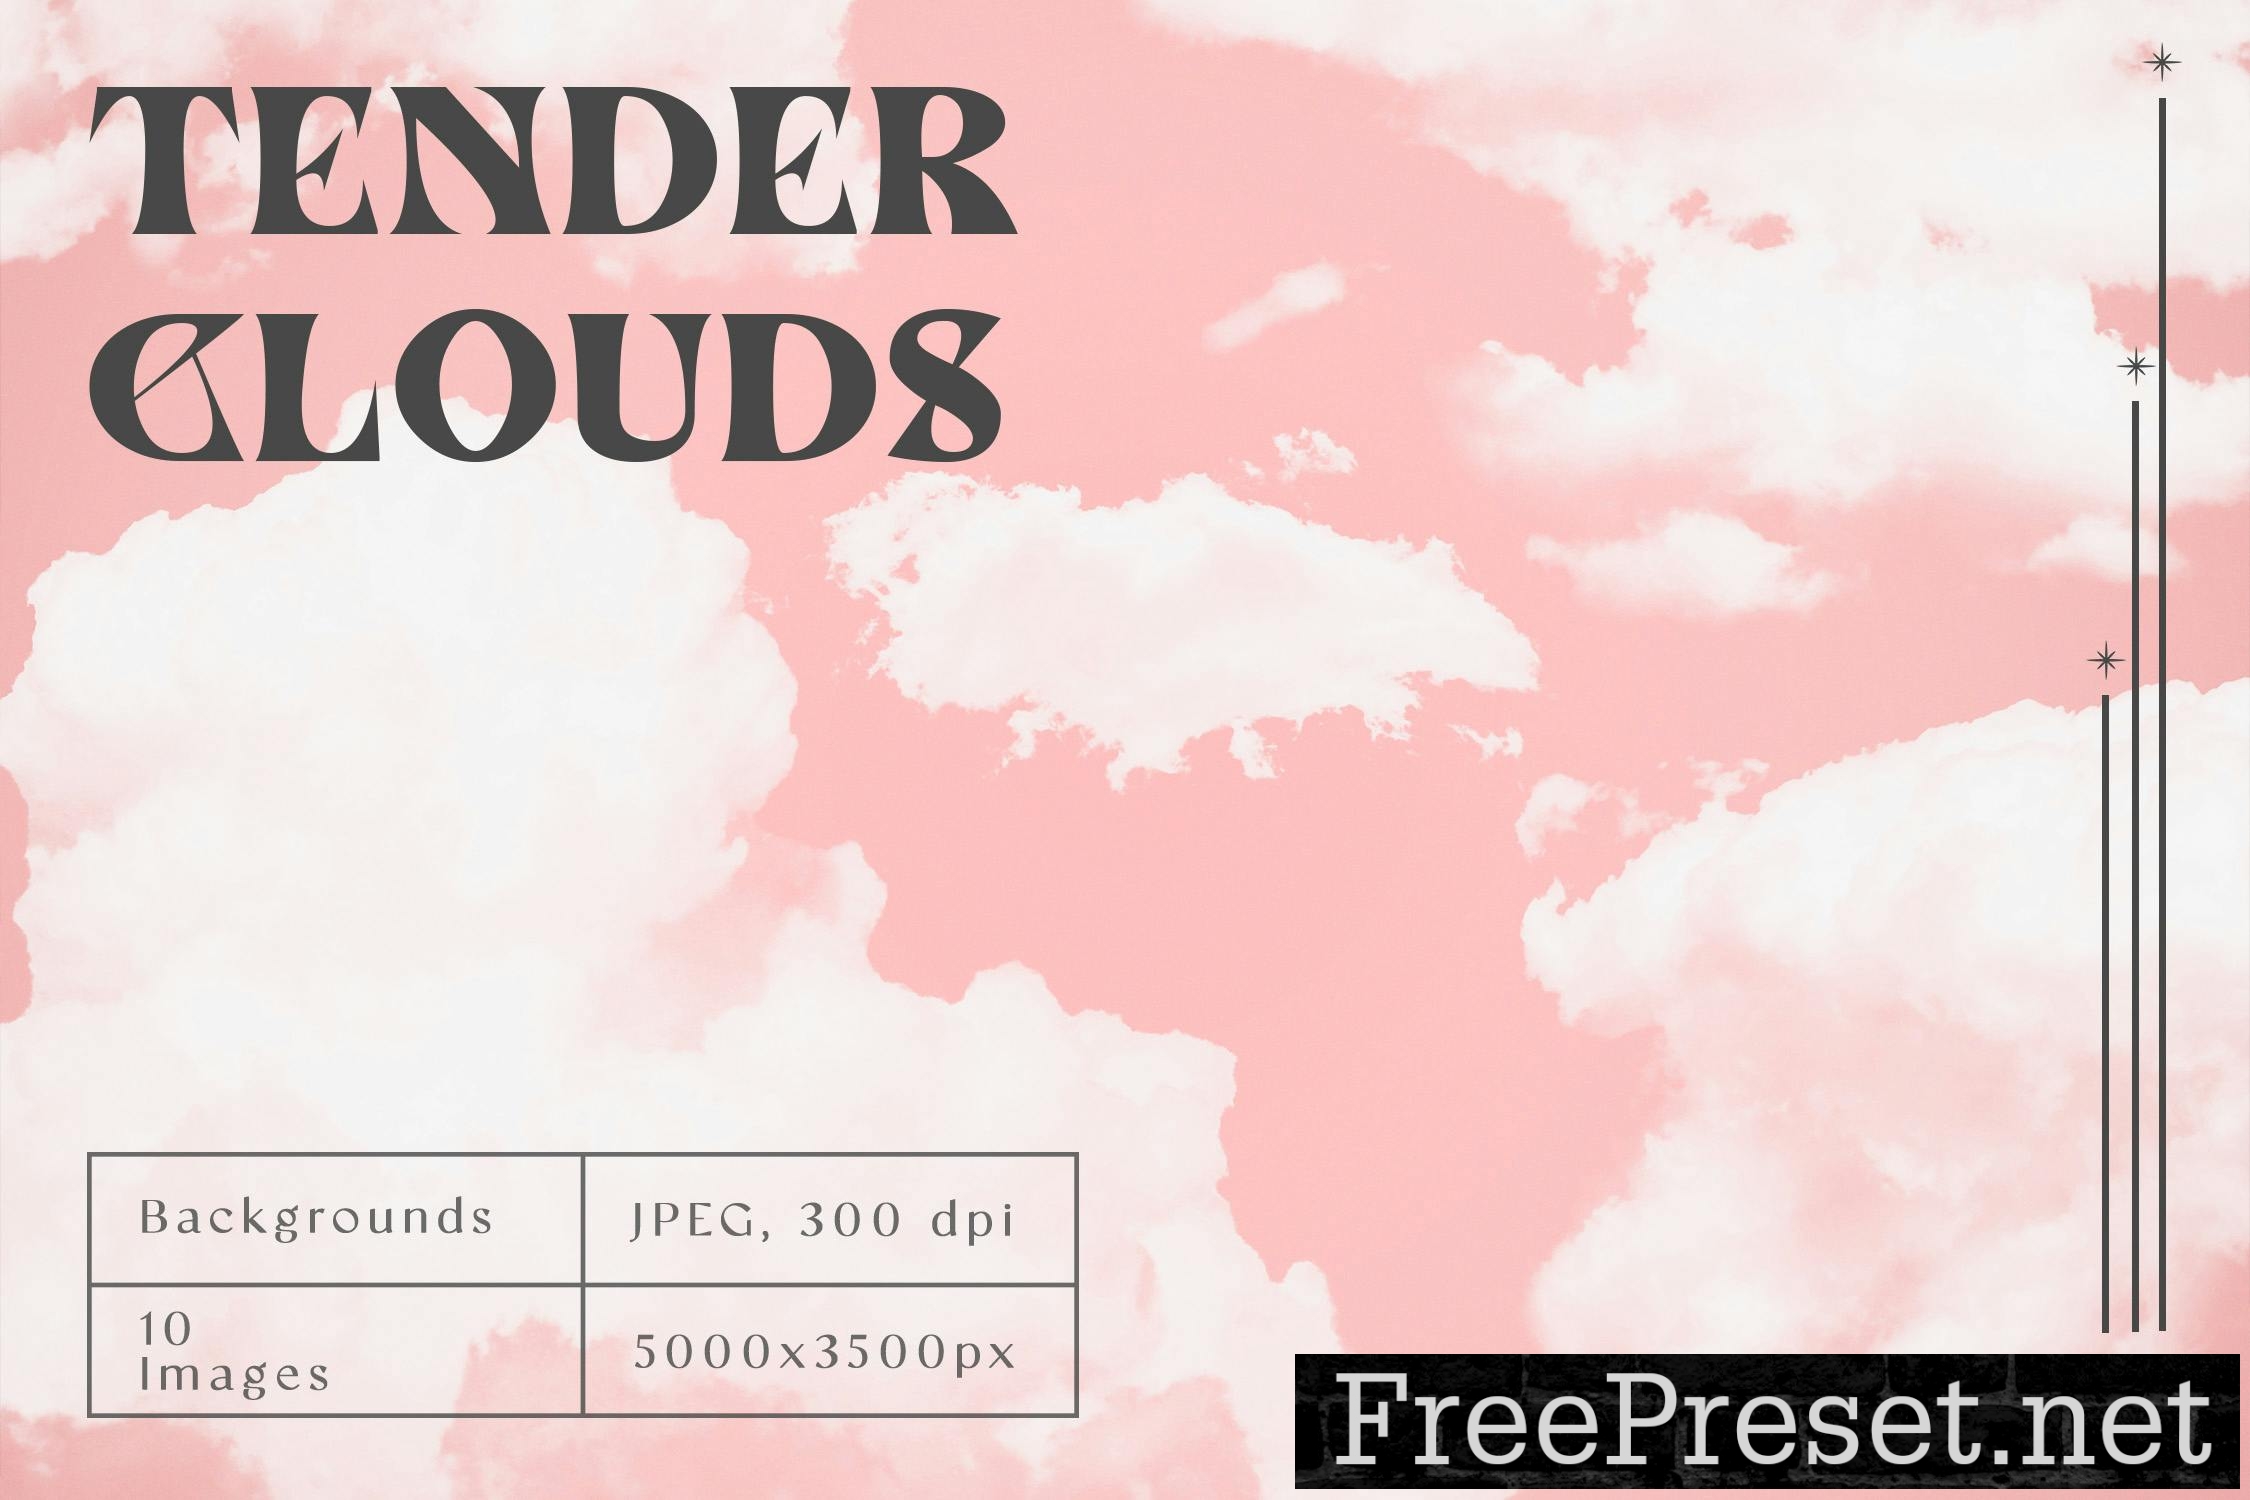 motion backgrounds for propresenter free